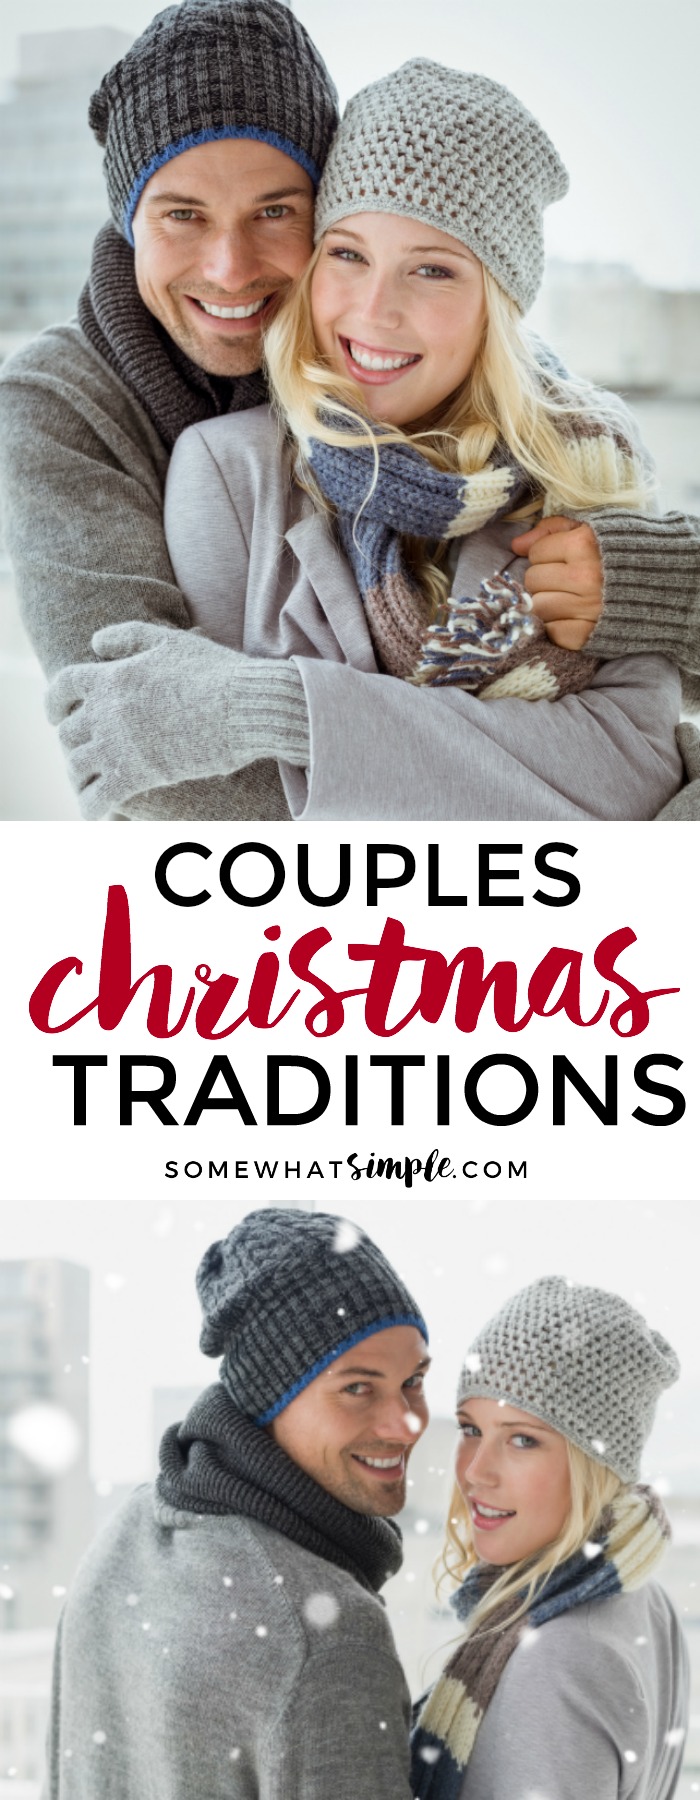 Taking the time to create Christmas traditions will do wonders for marriage.  Here are some great ideas that will give you fond memories to look back on! #christmas #christmastraditions #romance #christmasideas via @somewhatsimple